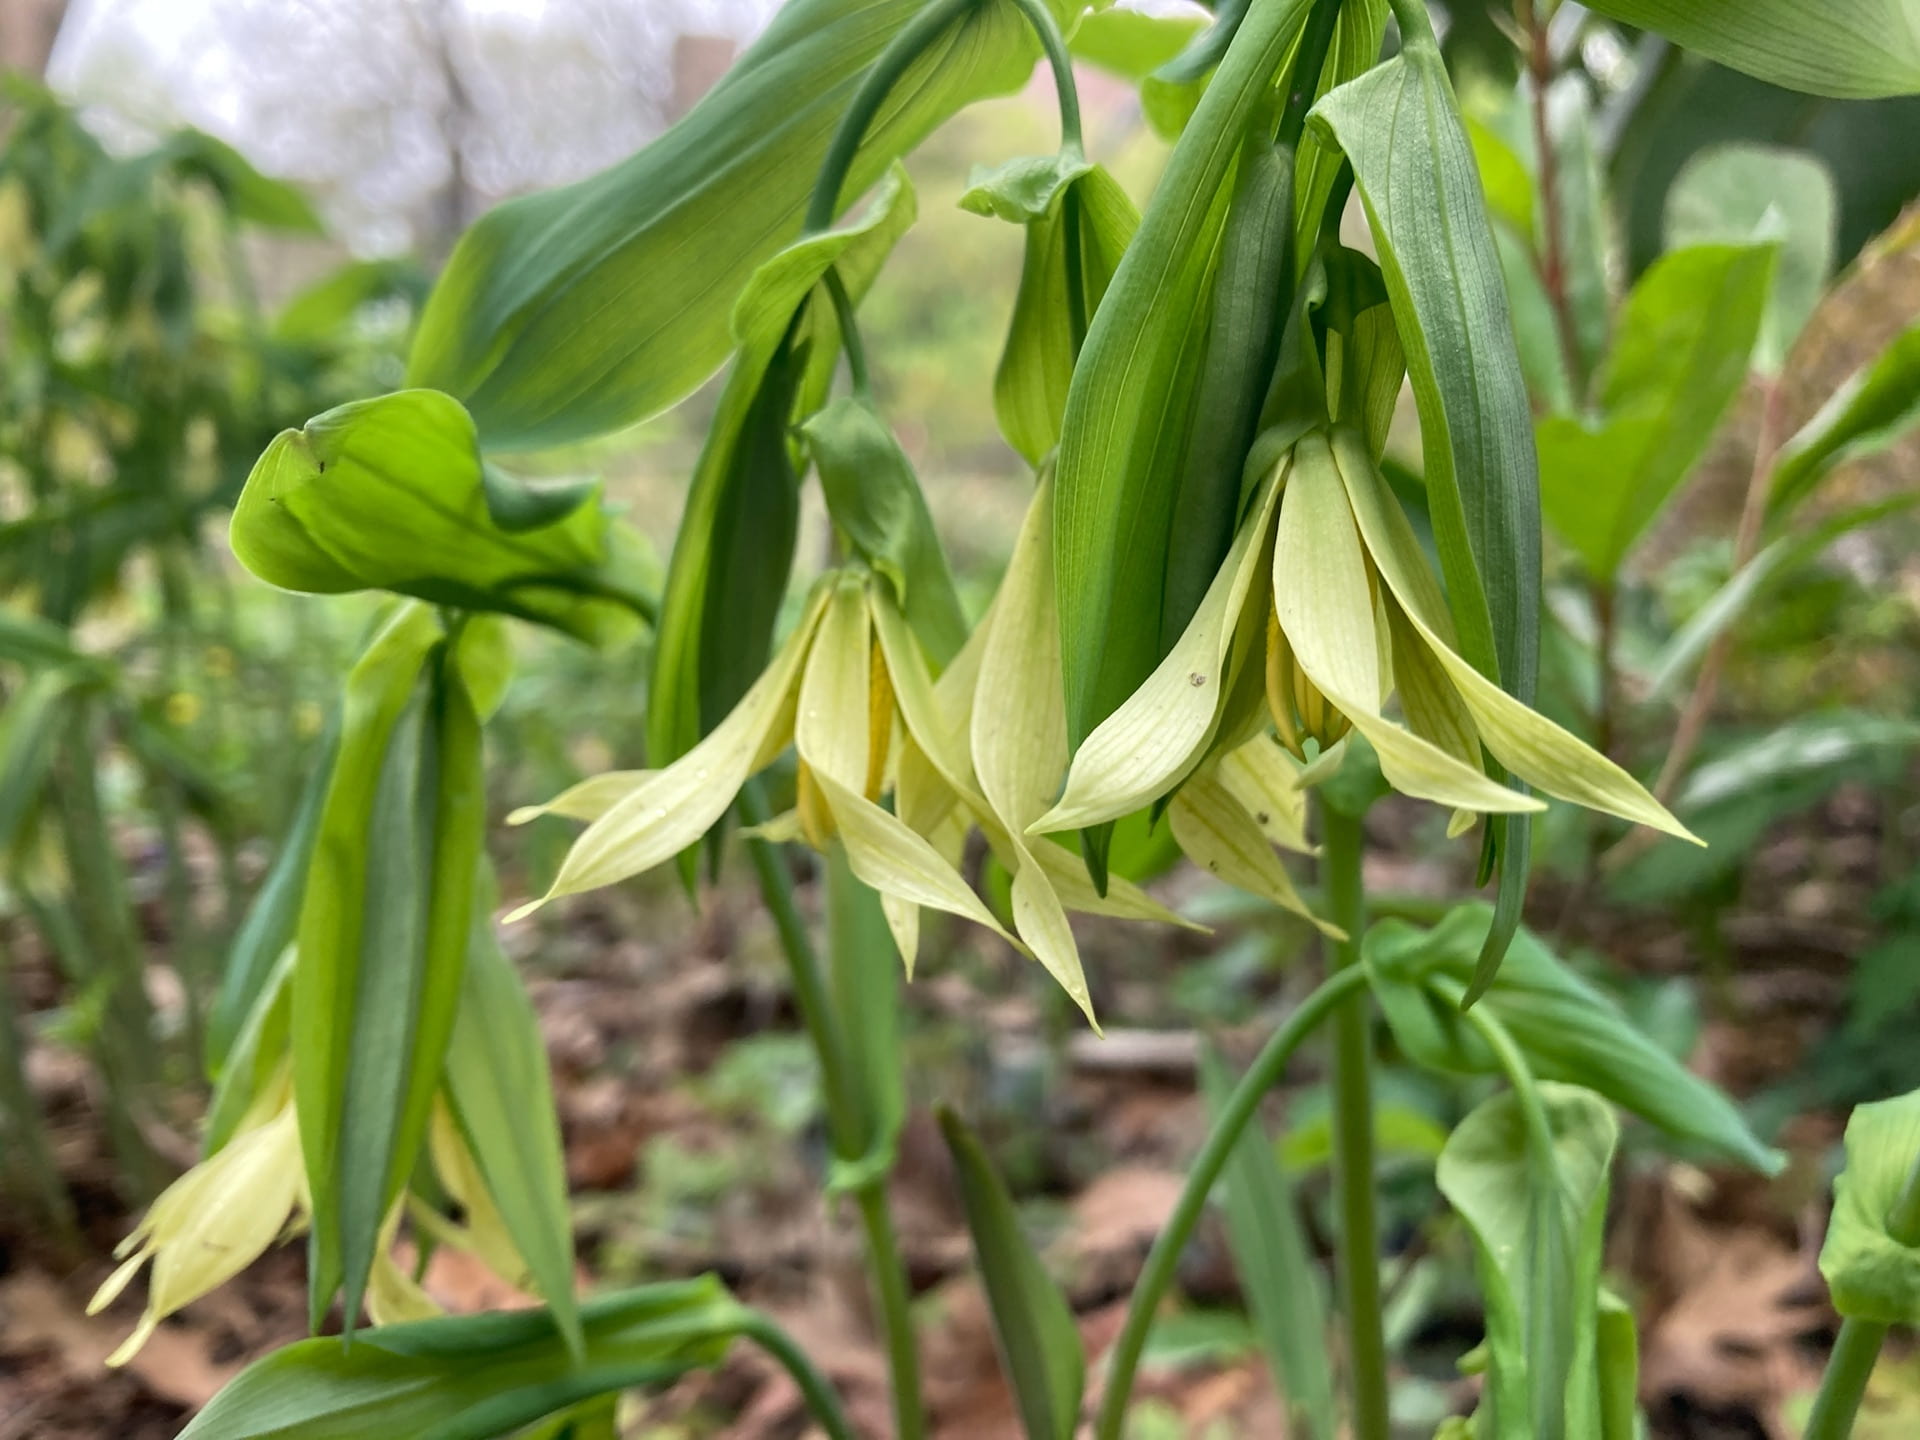 The dynamic, twisting flowers of Uvularia perfoliata hang down from newly emerged stems.